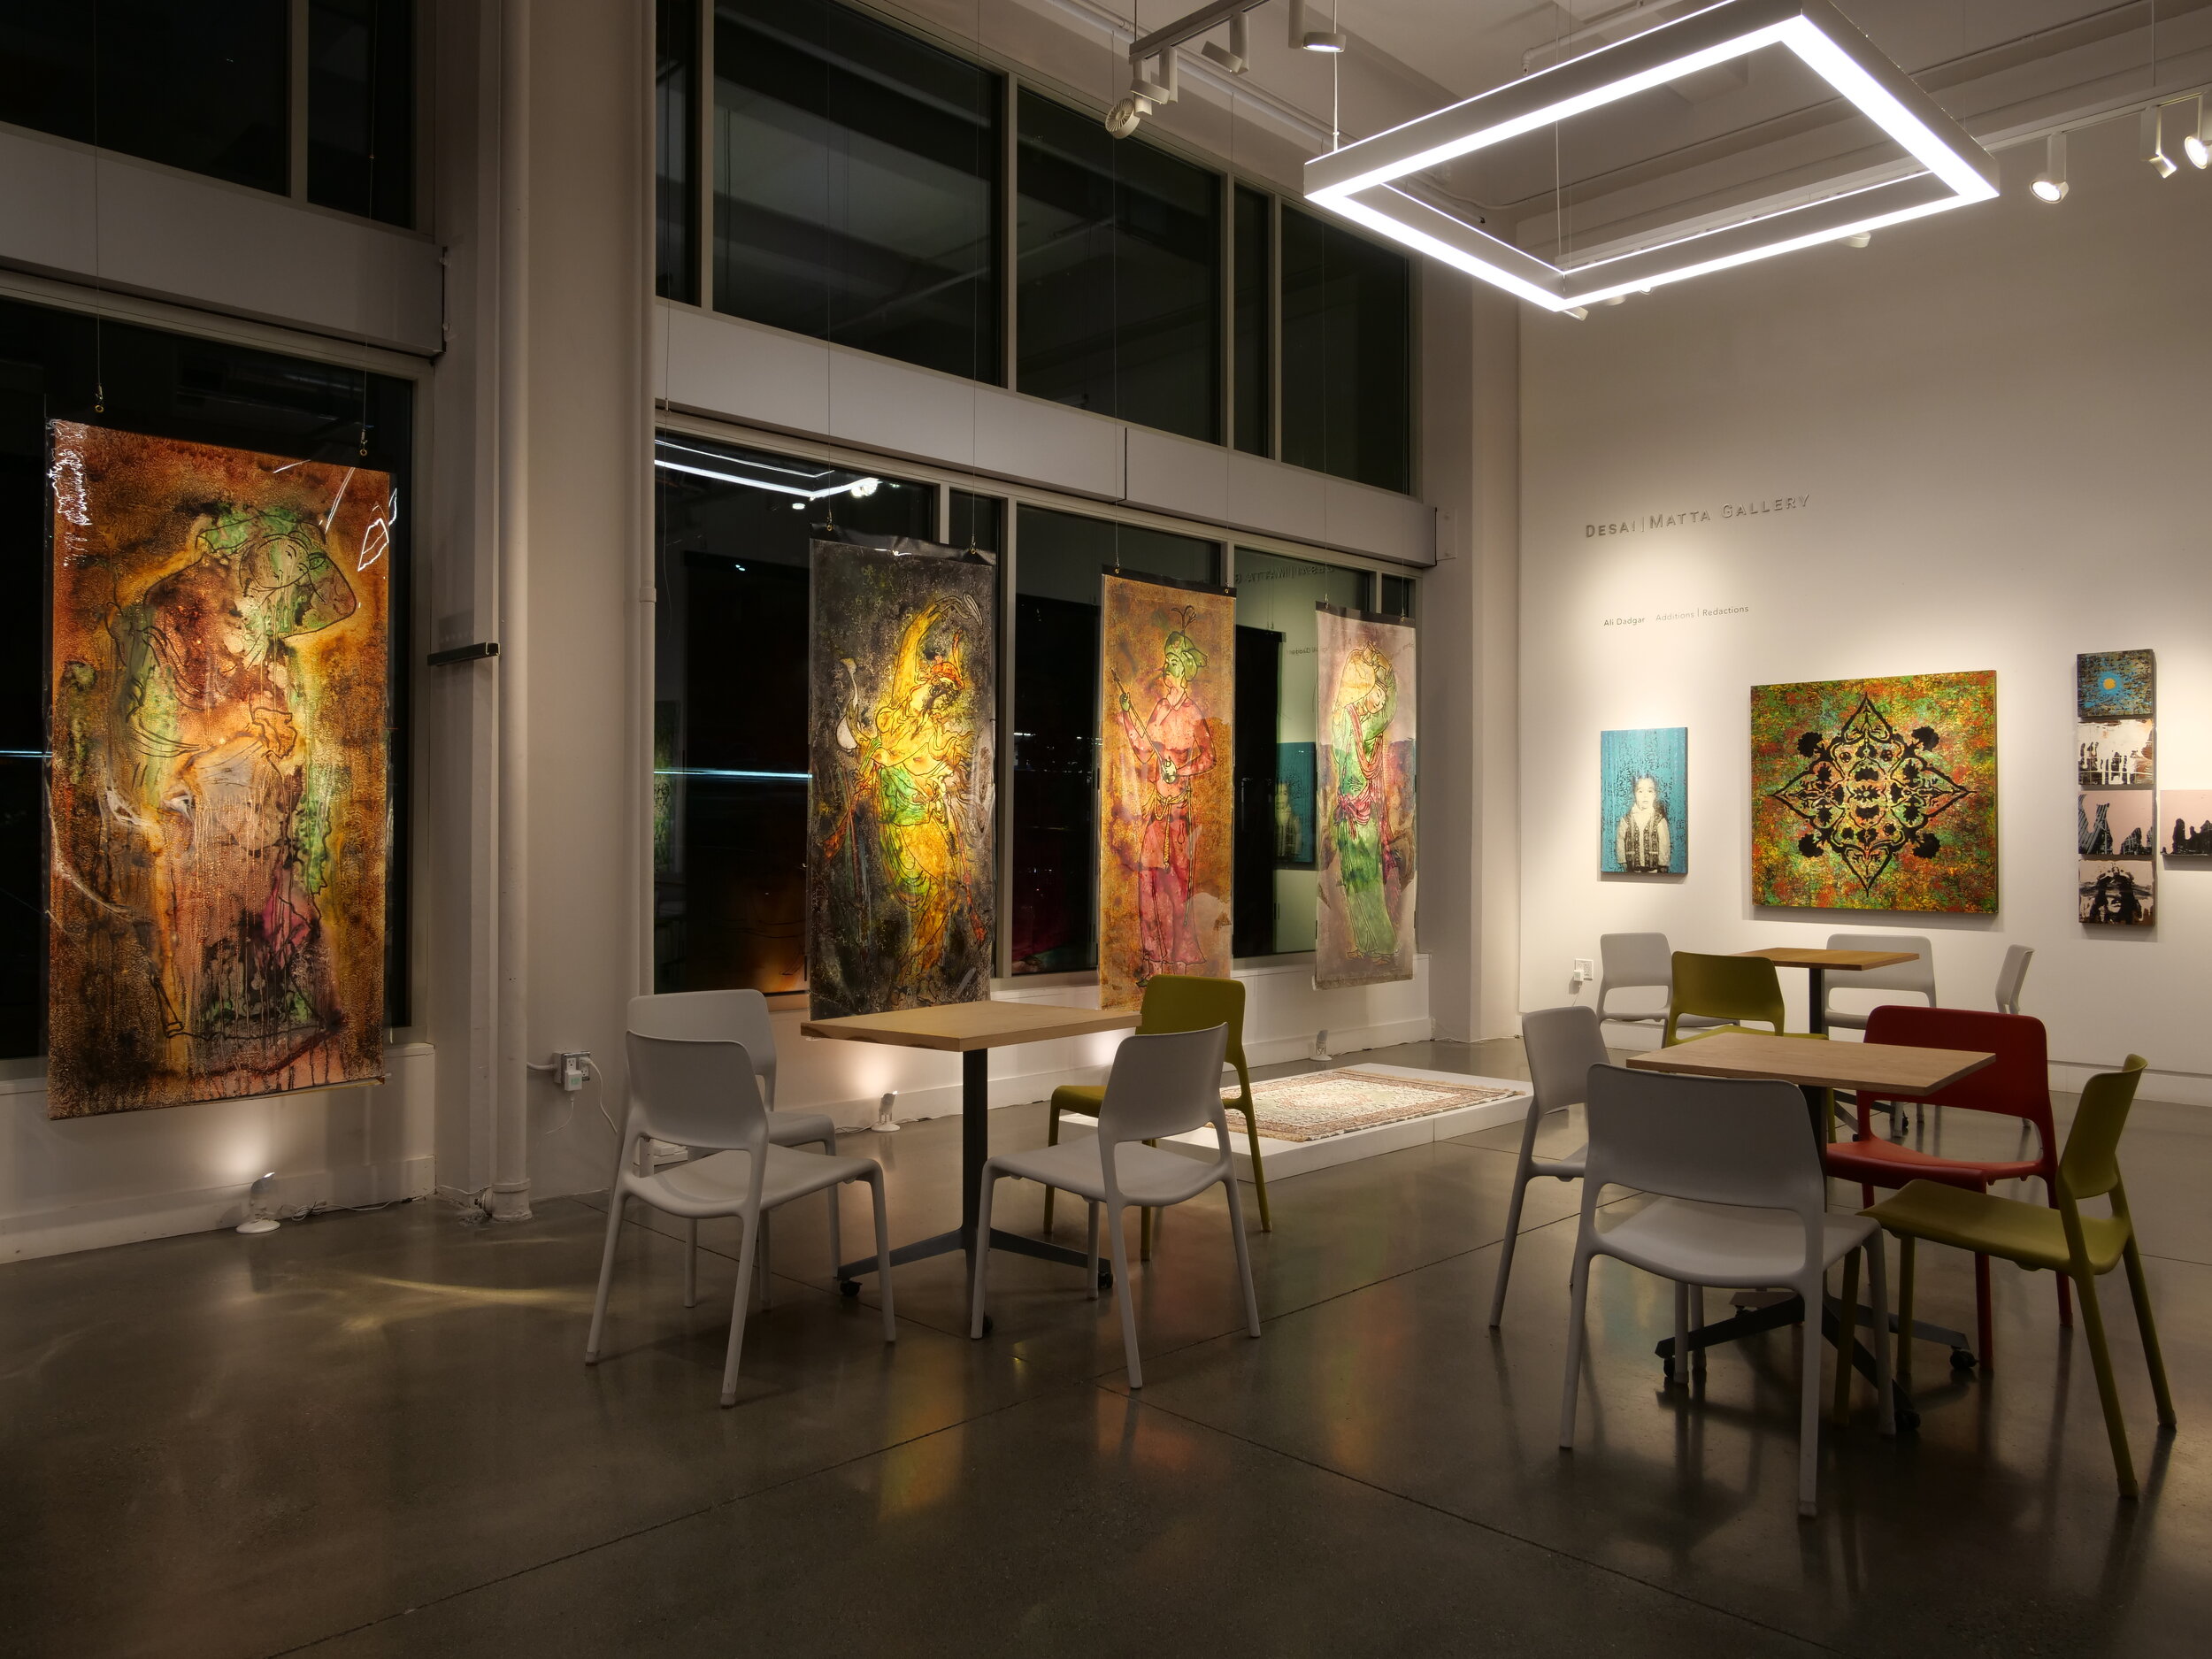 Gallery view of four large panels featuring figures in warm tones hung along the windows. 